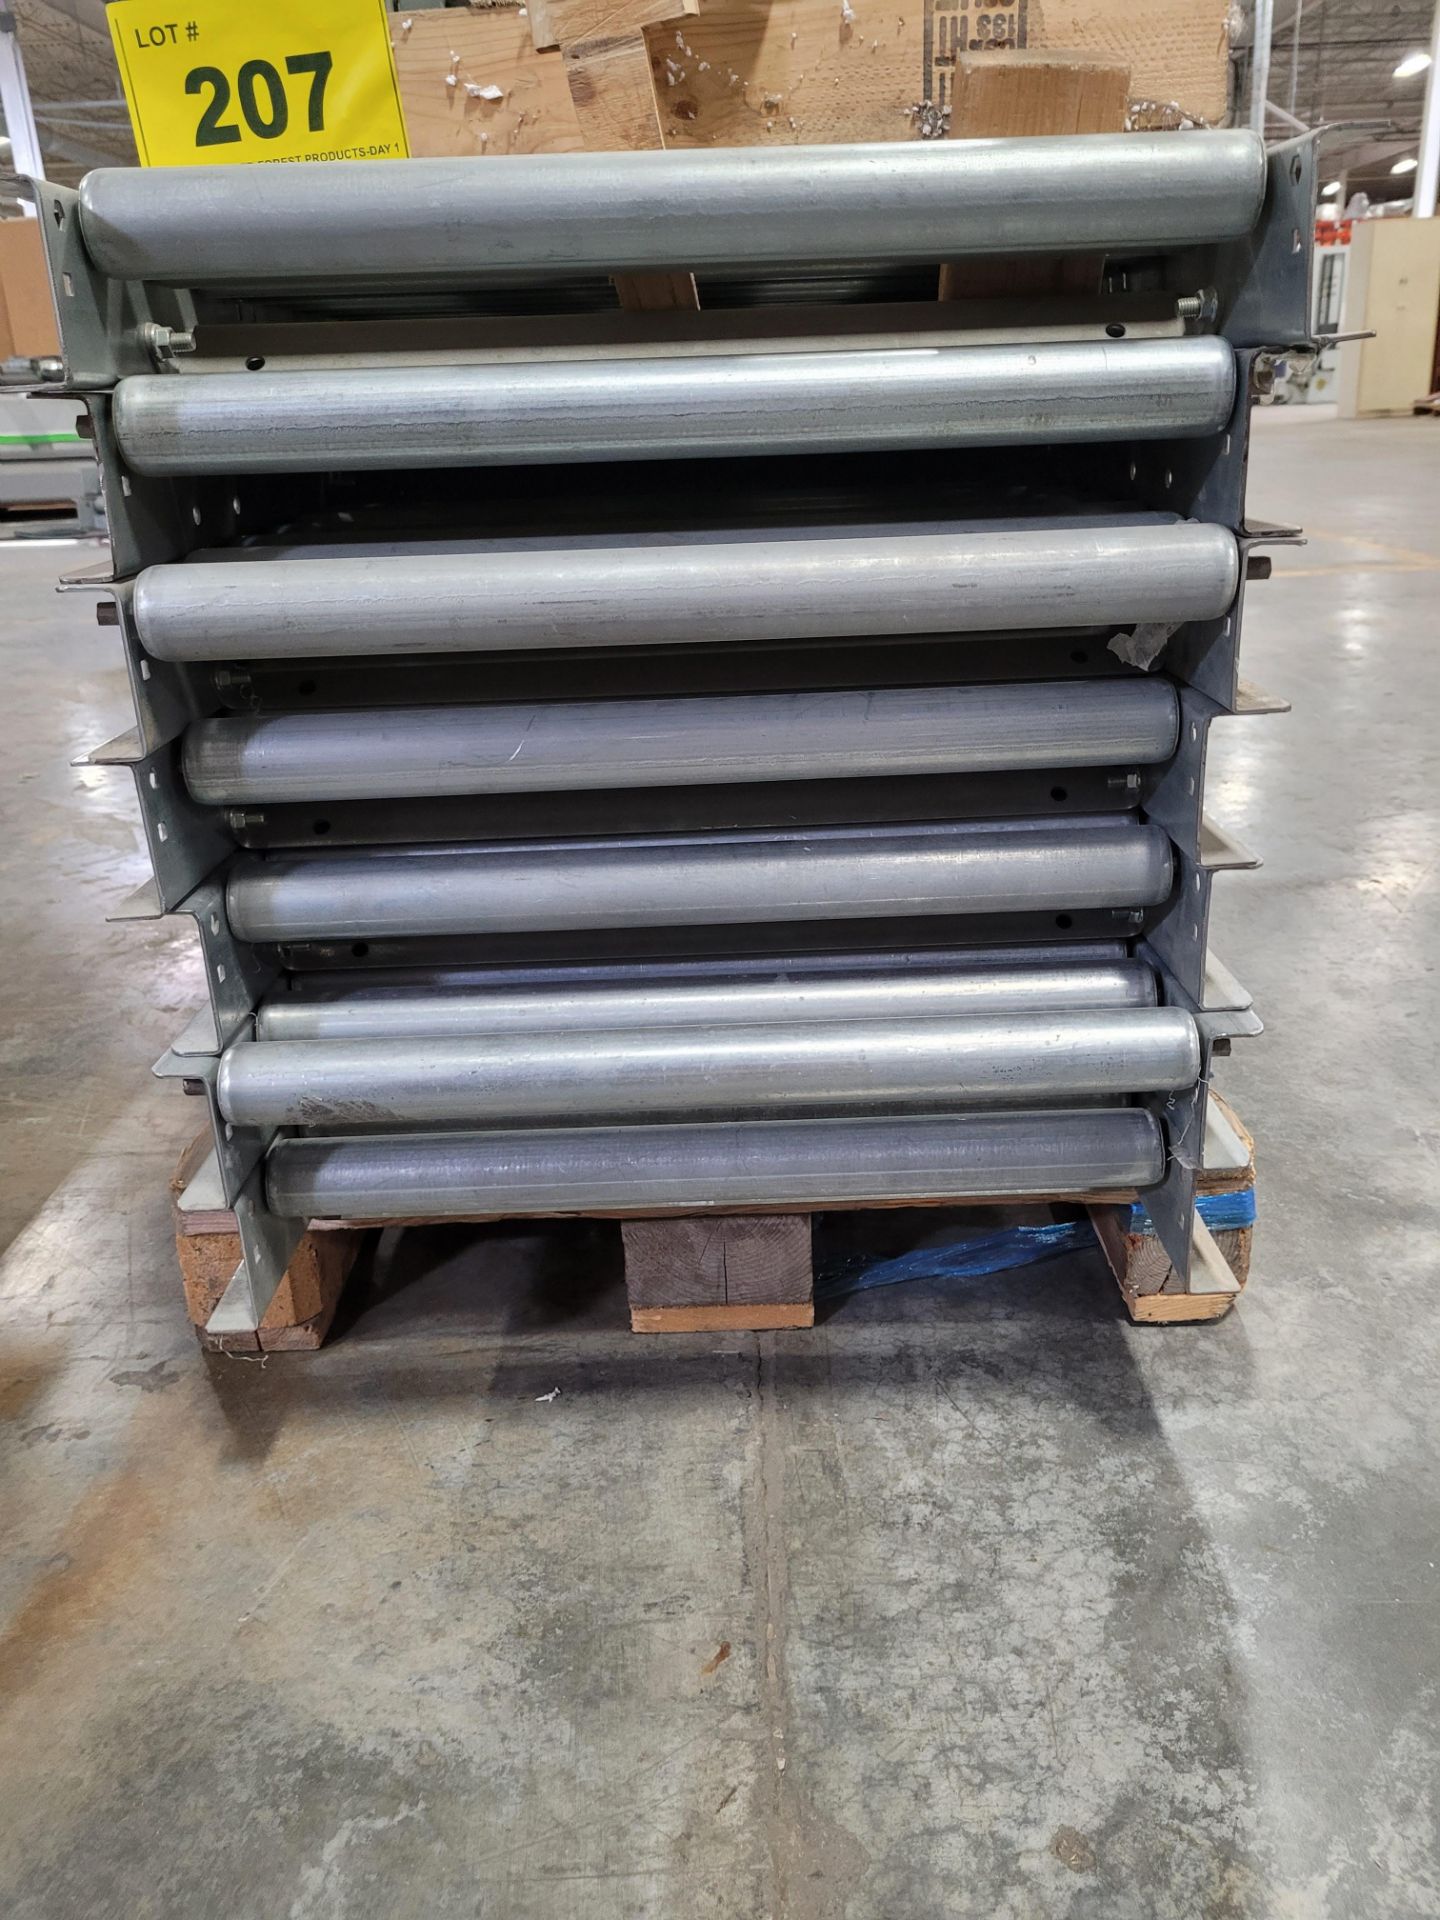 LOT - (7) 60"L X 24"W ROLLER TOP CONVEYORS W/ (7) STANDS - Image 2 of 2